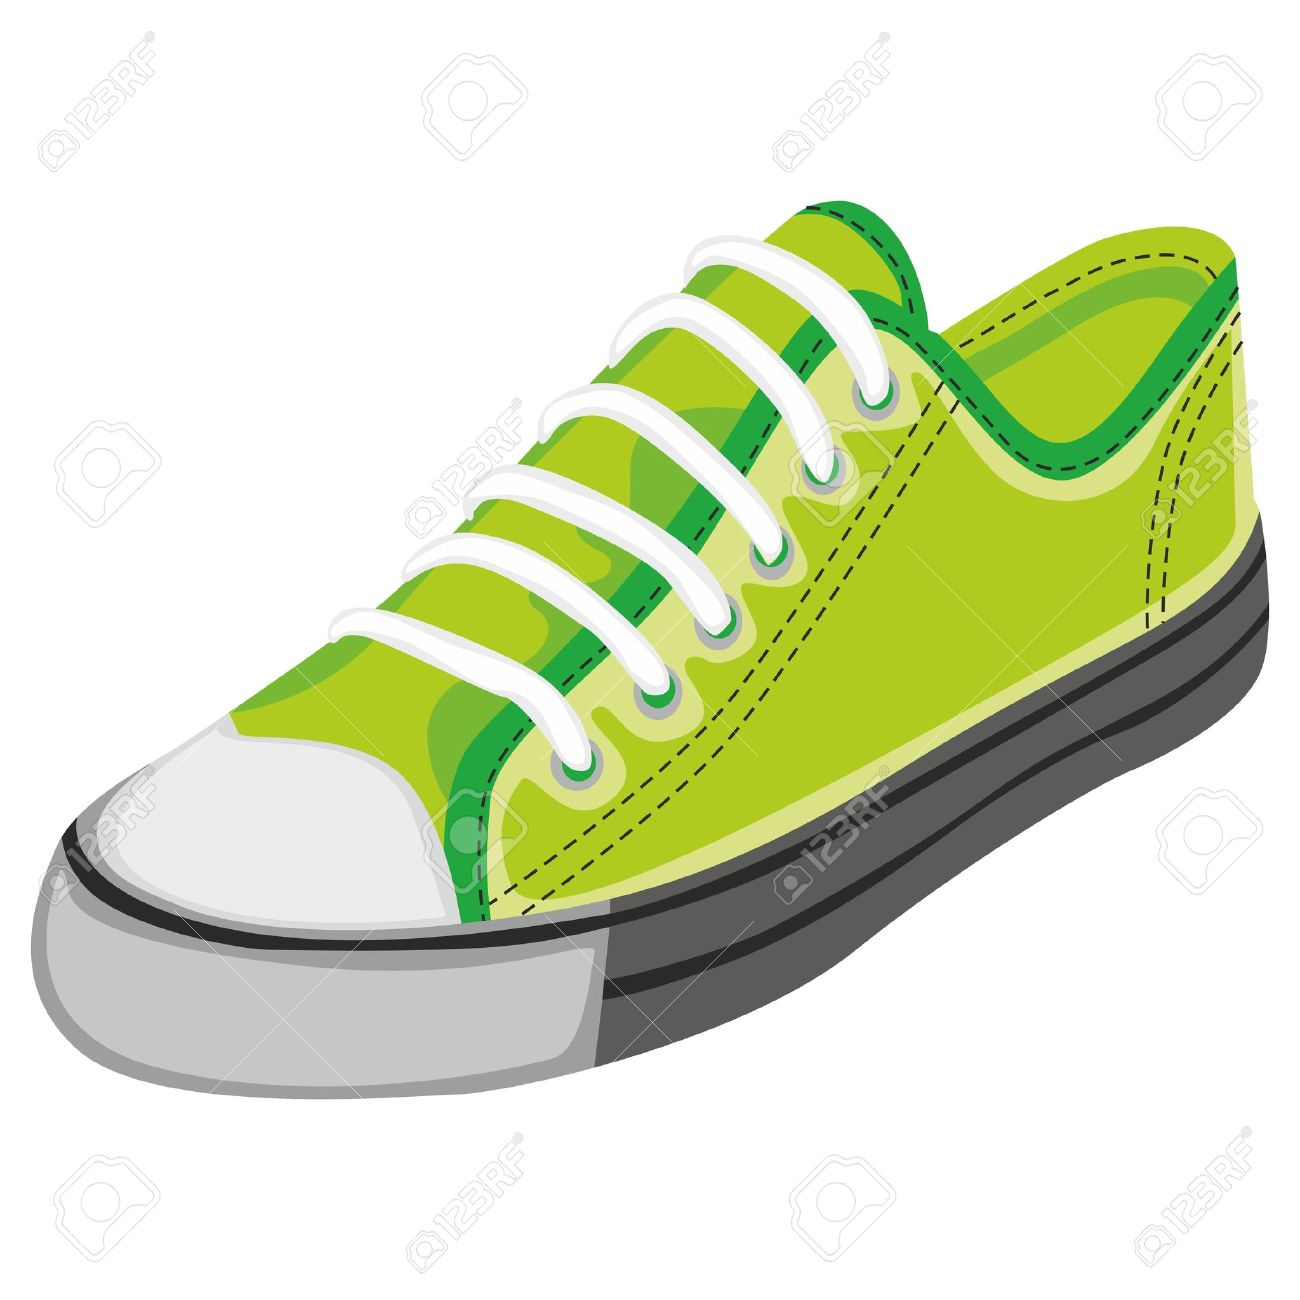 Sneaker cliparts free.